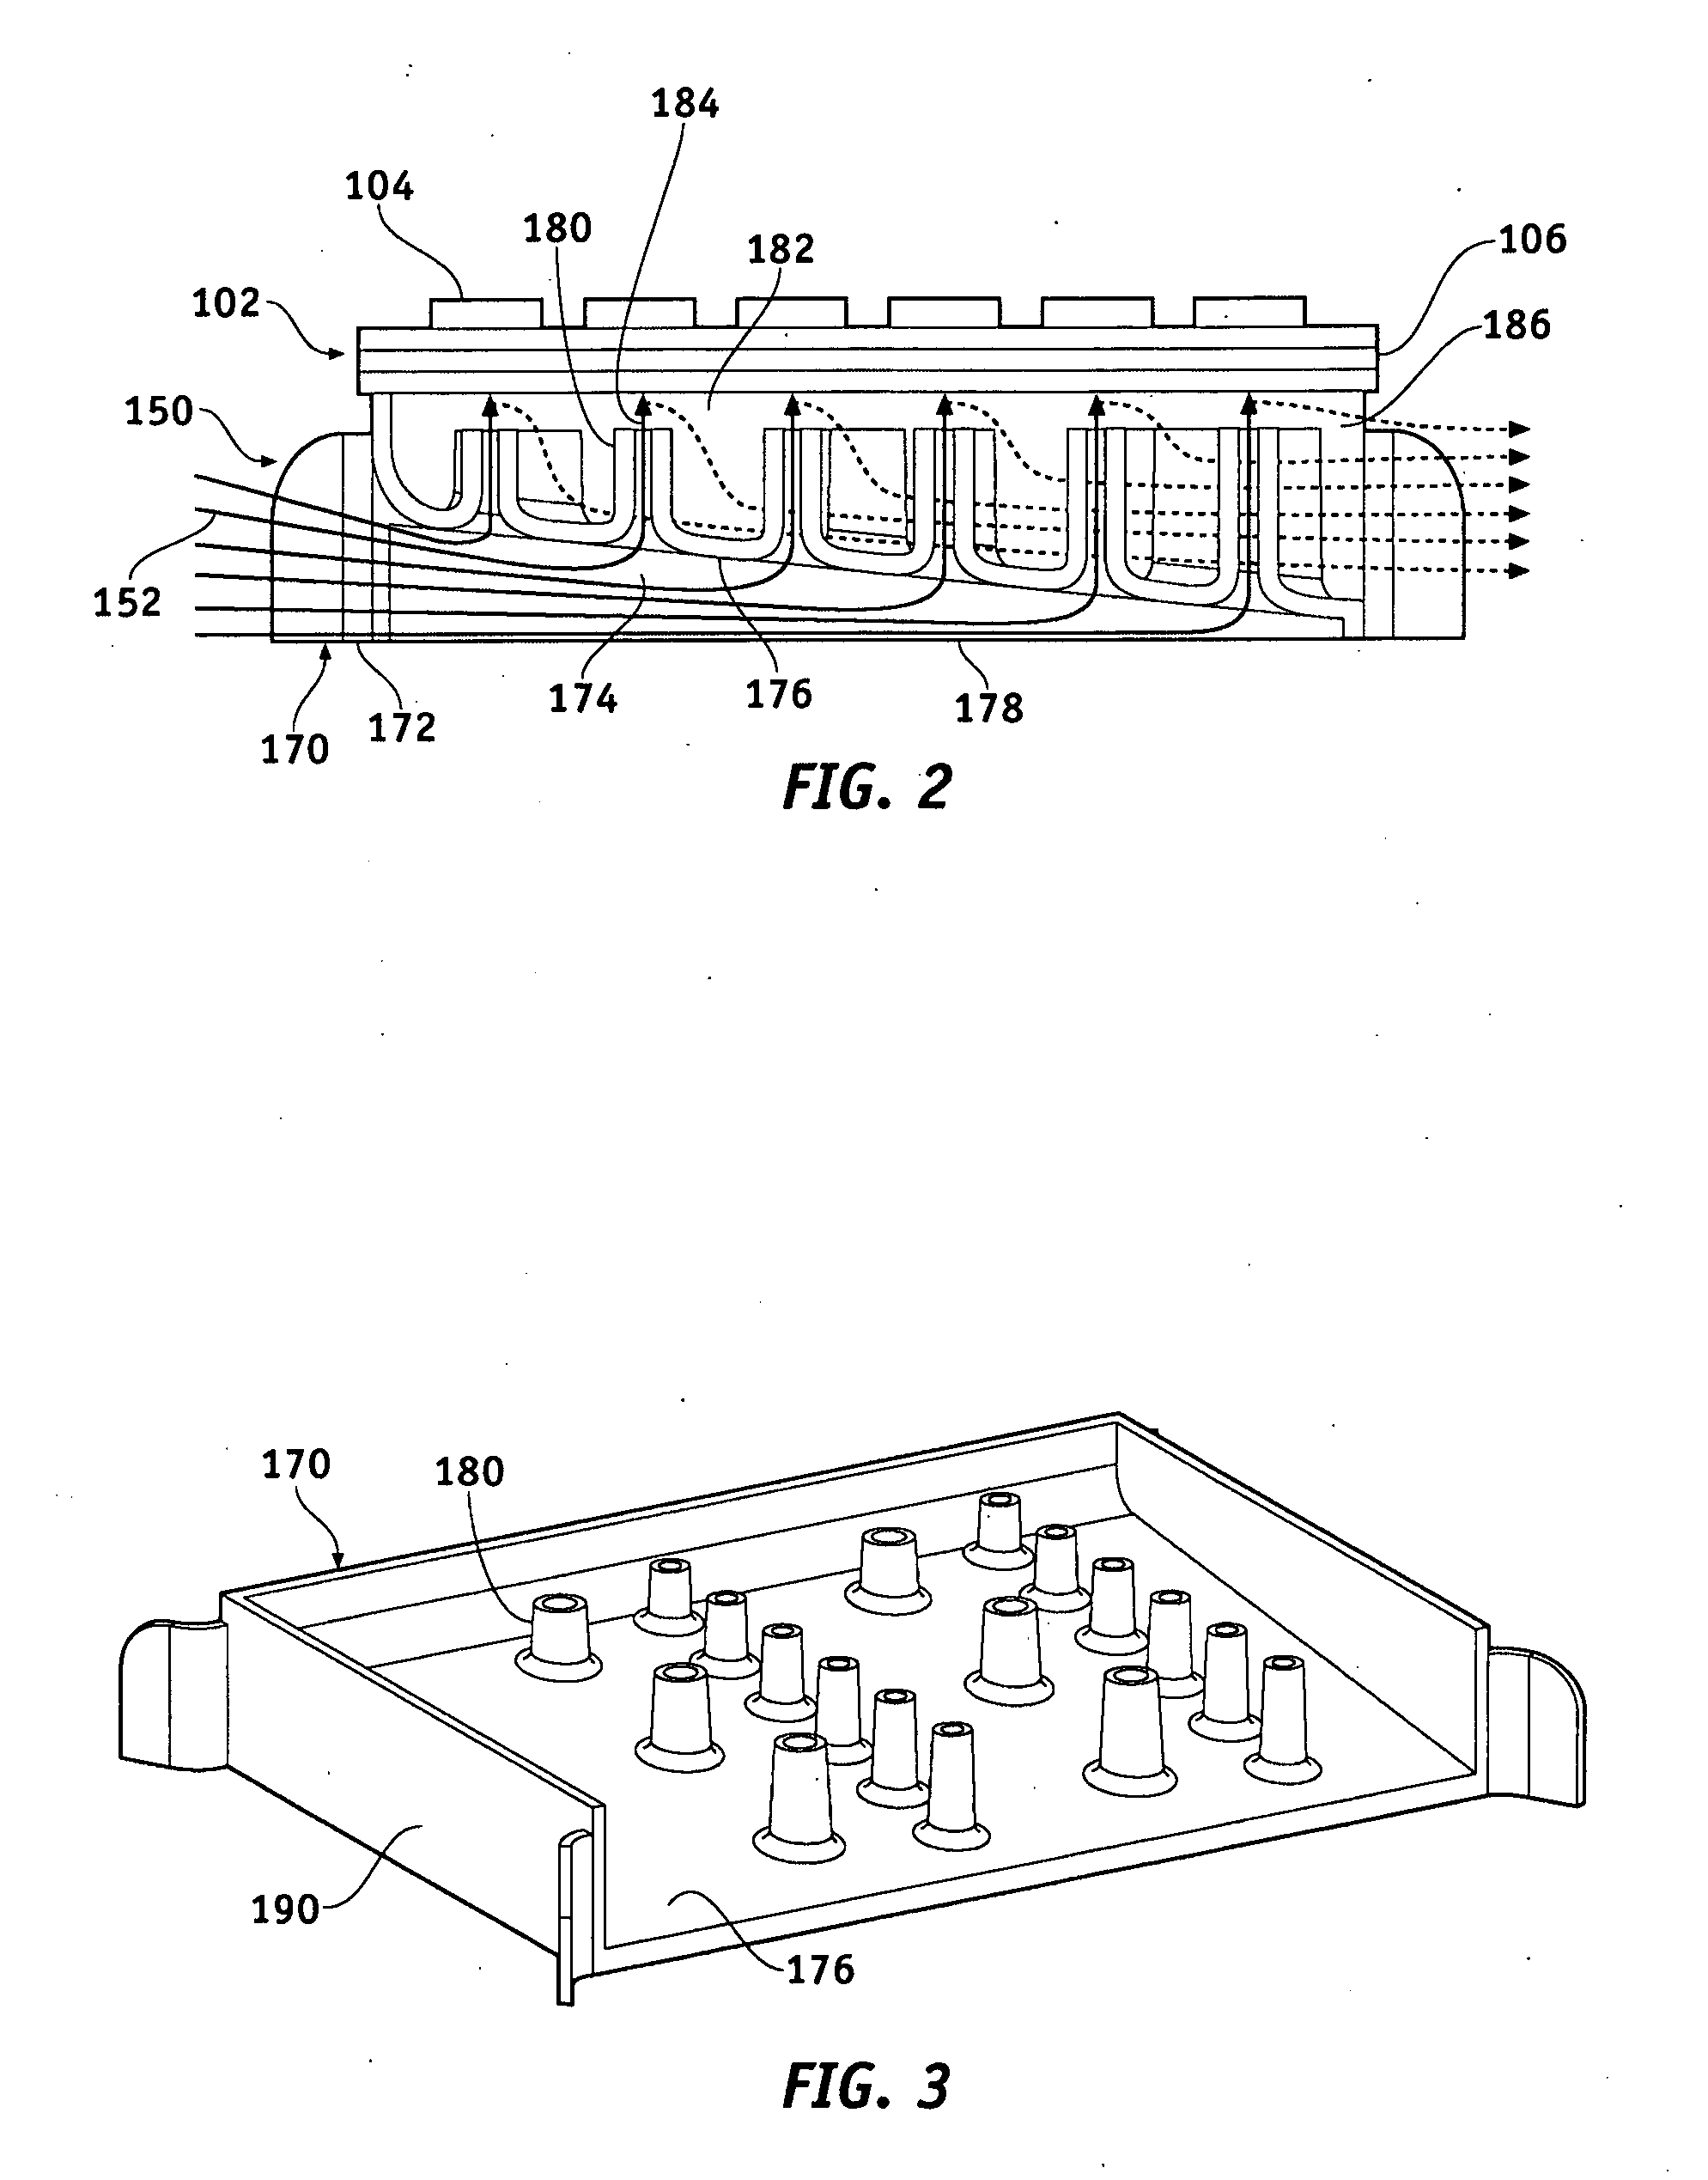 Cooling systems for power semiconductor devices